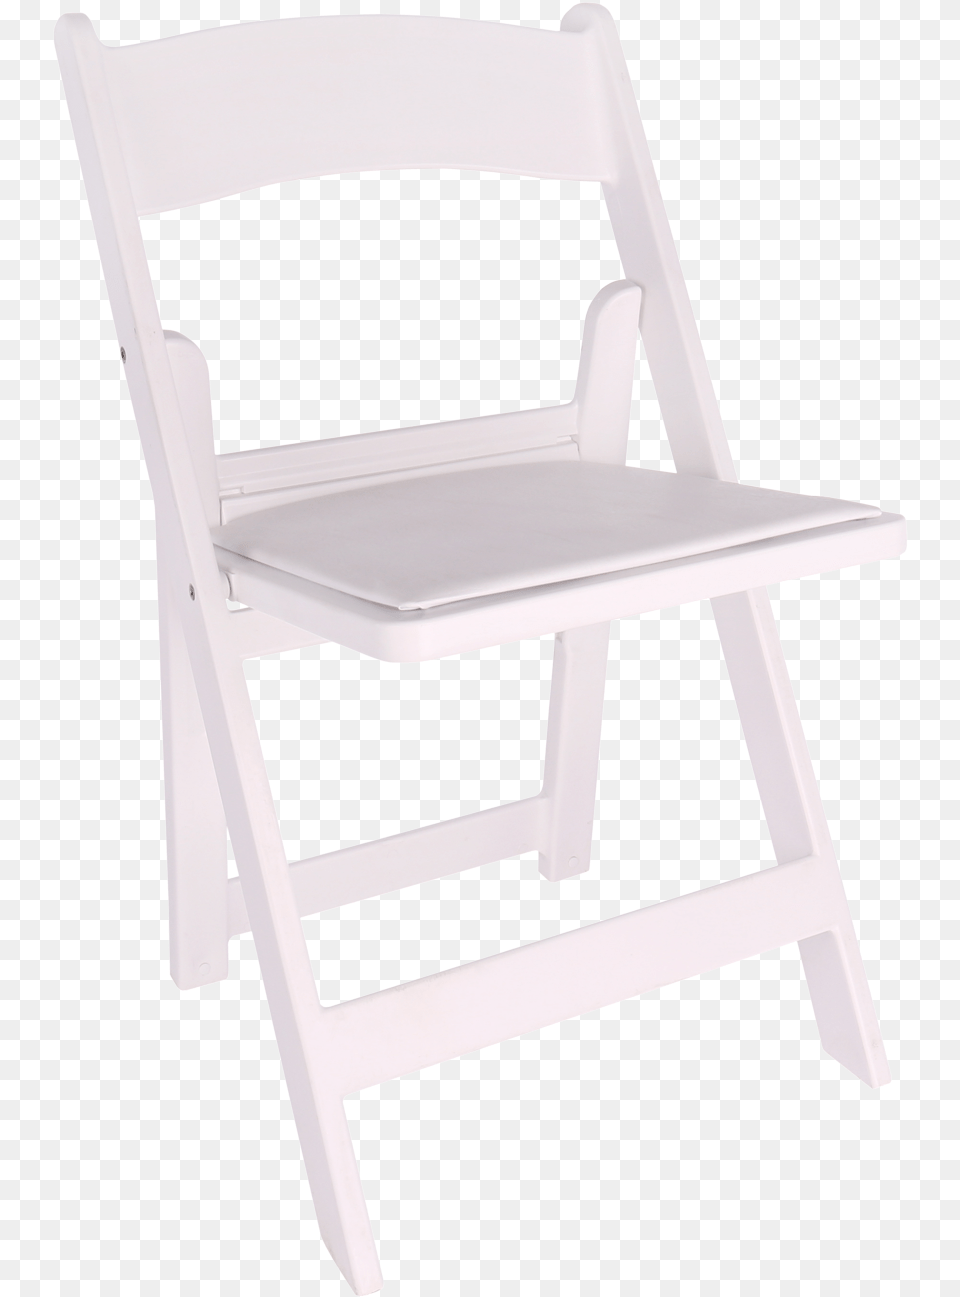 Chair White Resin Folding Chair With Padded Seat White Resin Folding With White Padded Seat, Canvas, Furniture Free Png